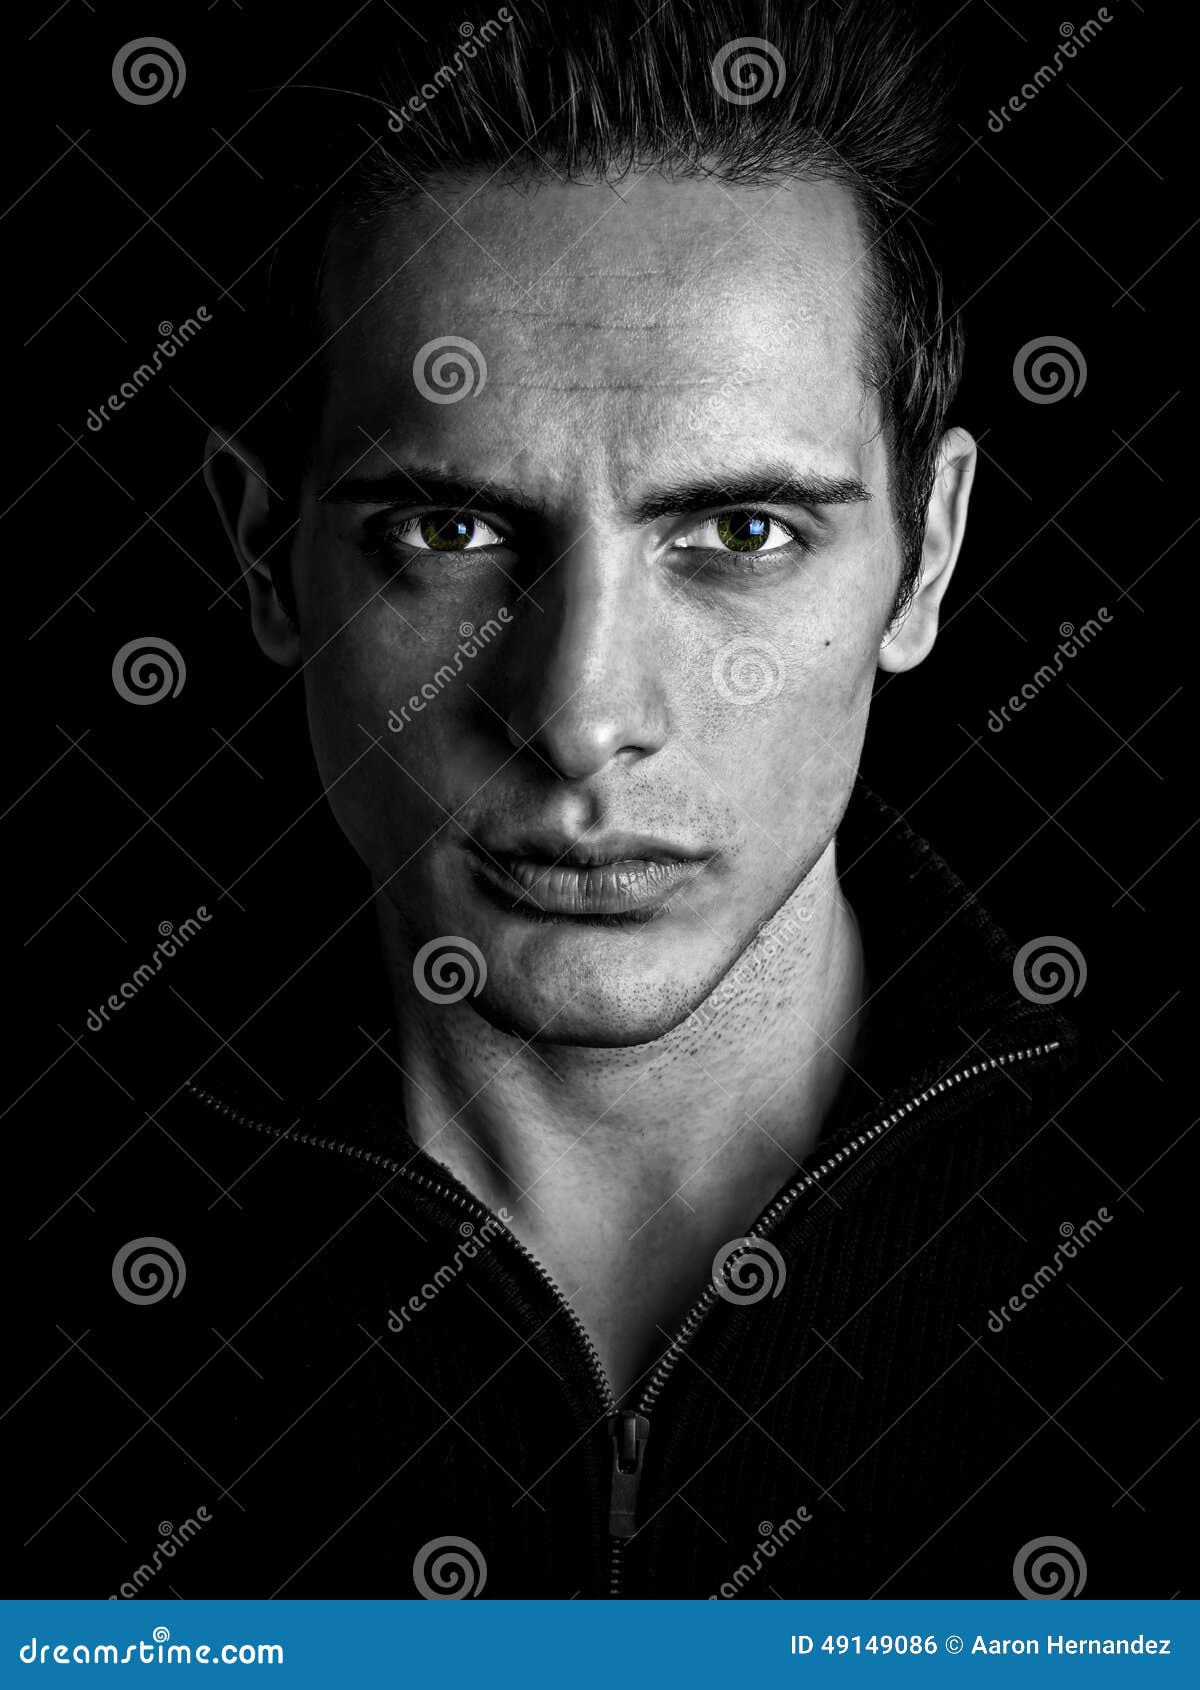 Dark Mysterious Male Stares Intensely Stock Photo - Image of single ...